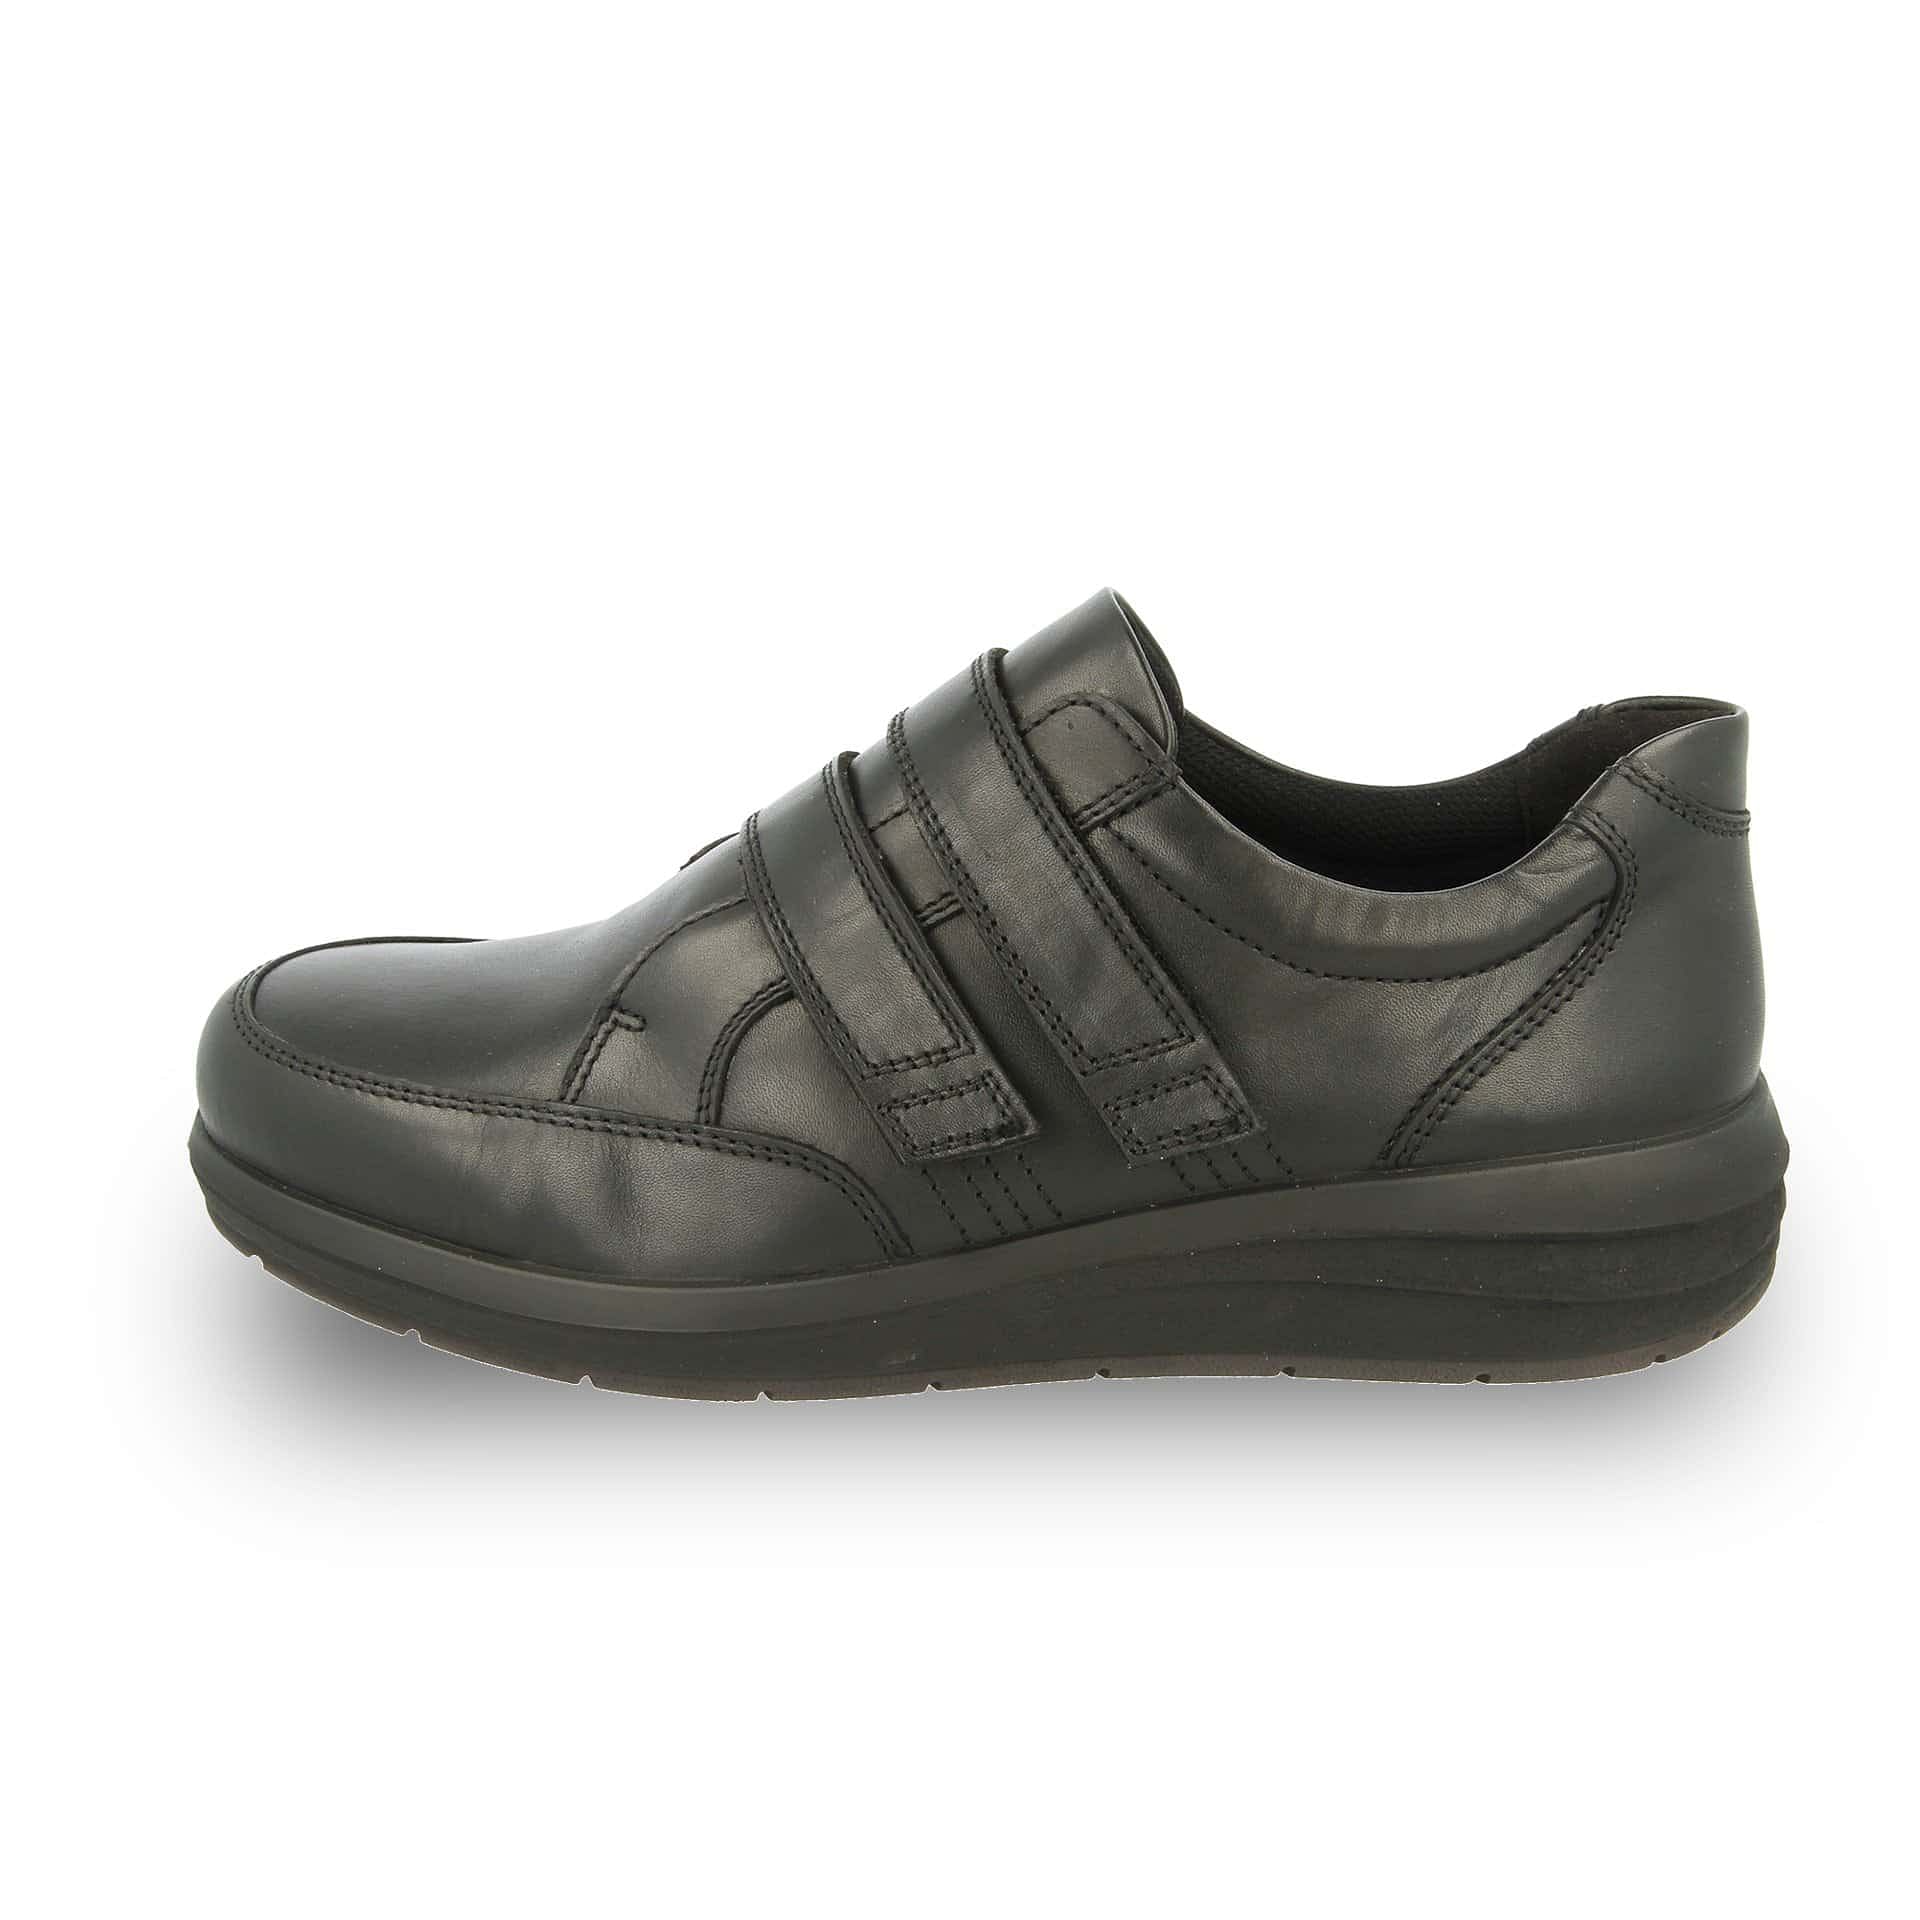 Orthotic-Friendly Men's Leather Shoes 